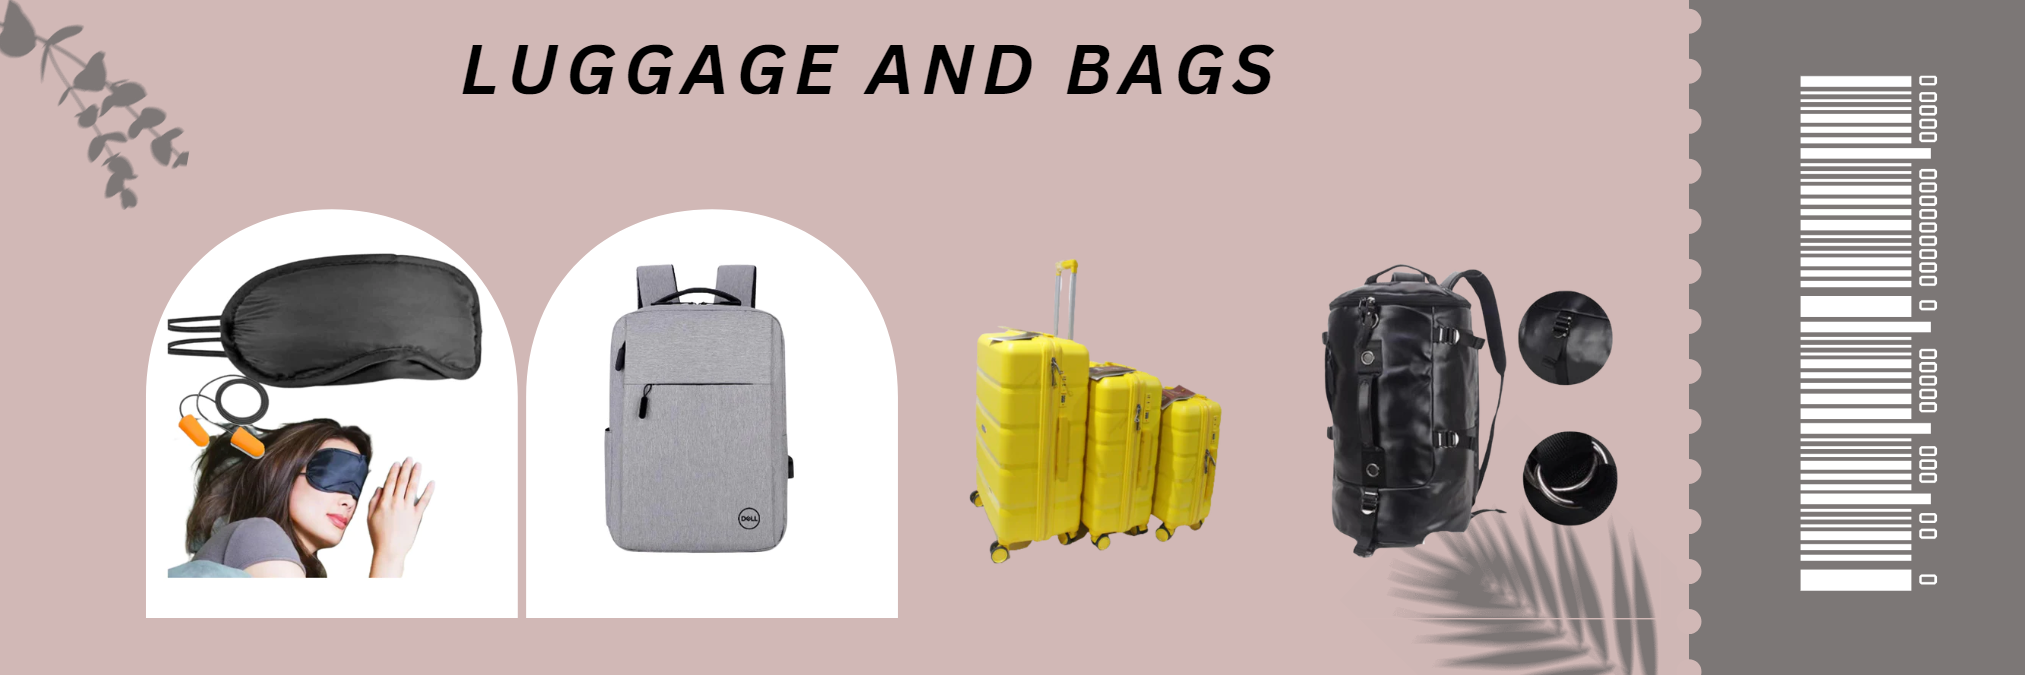 Luggage and Bags